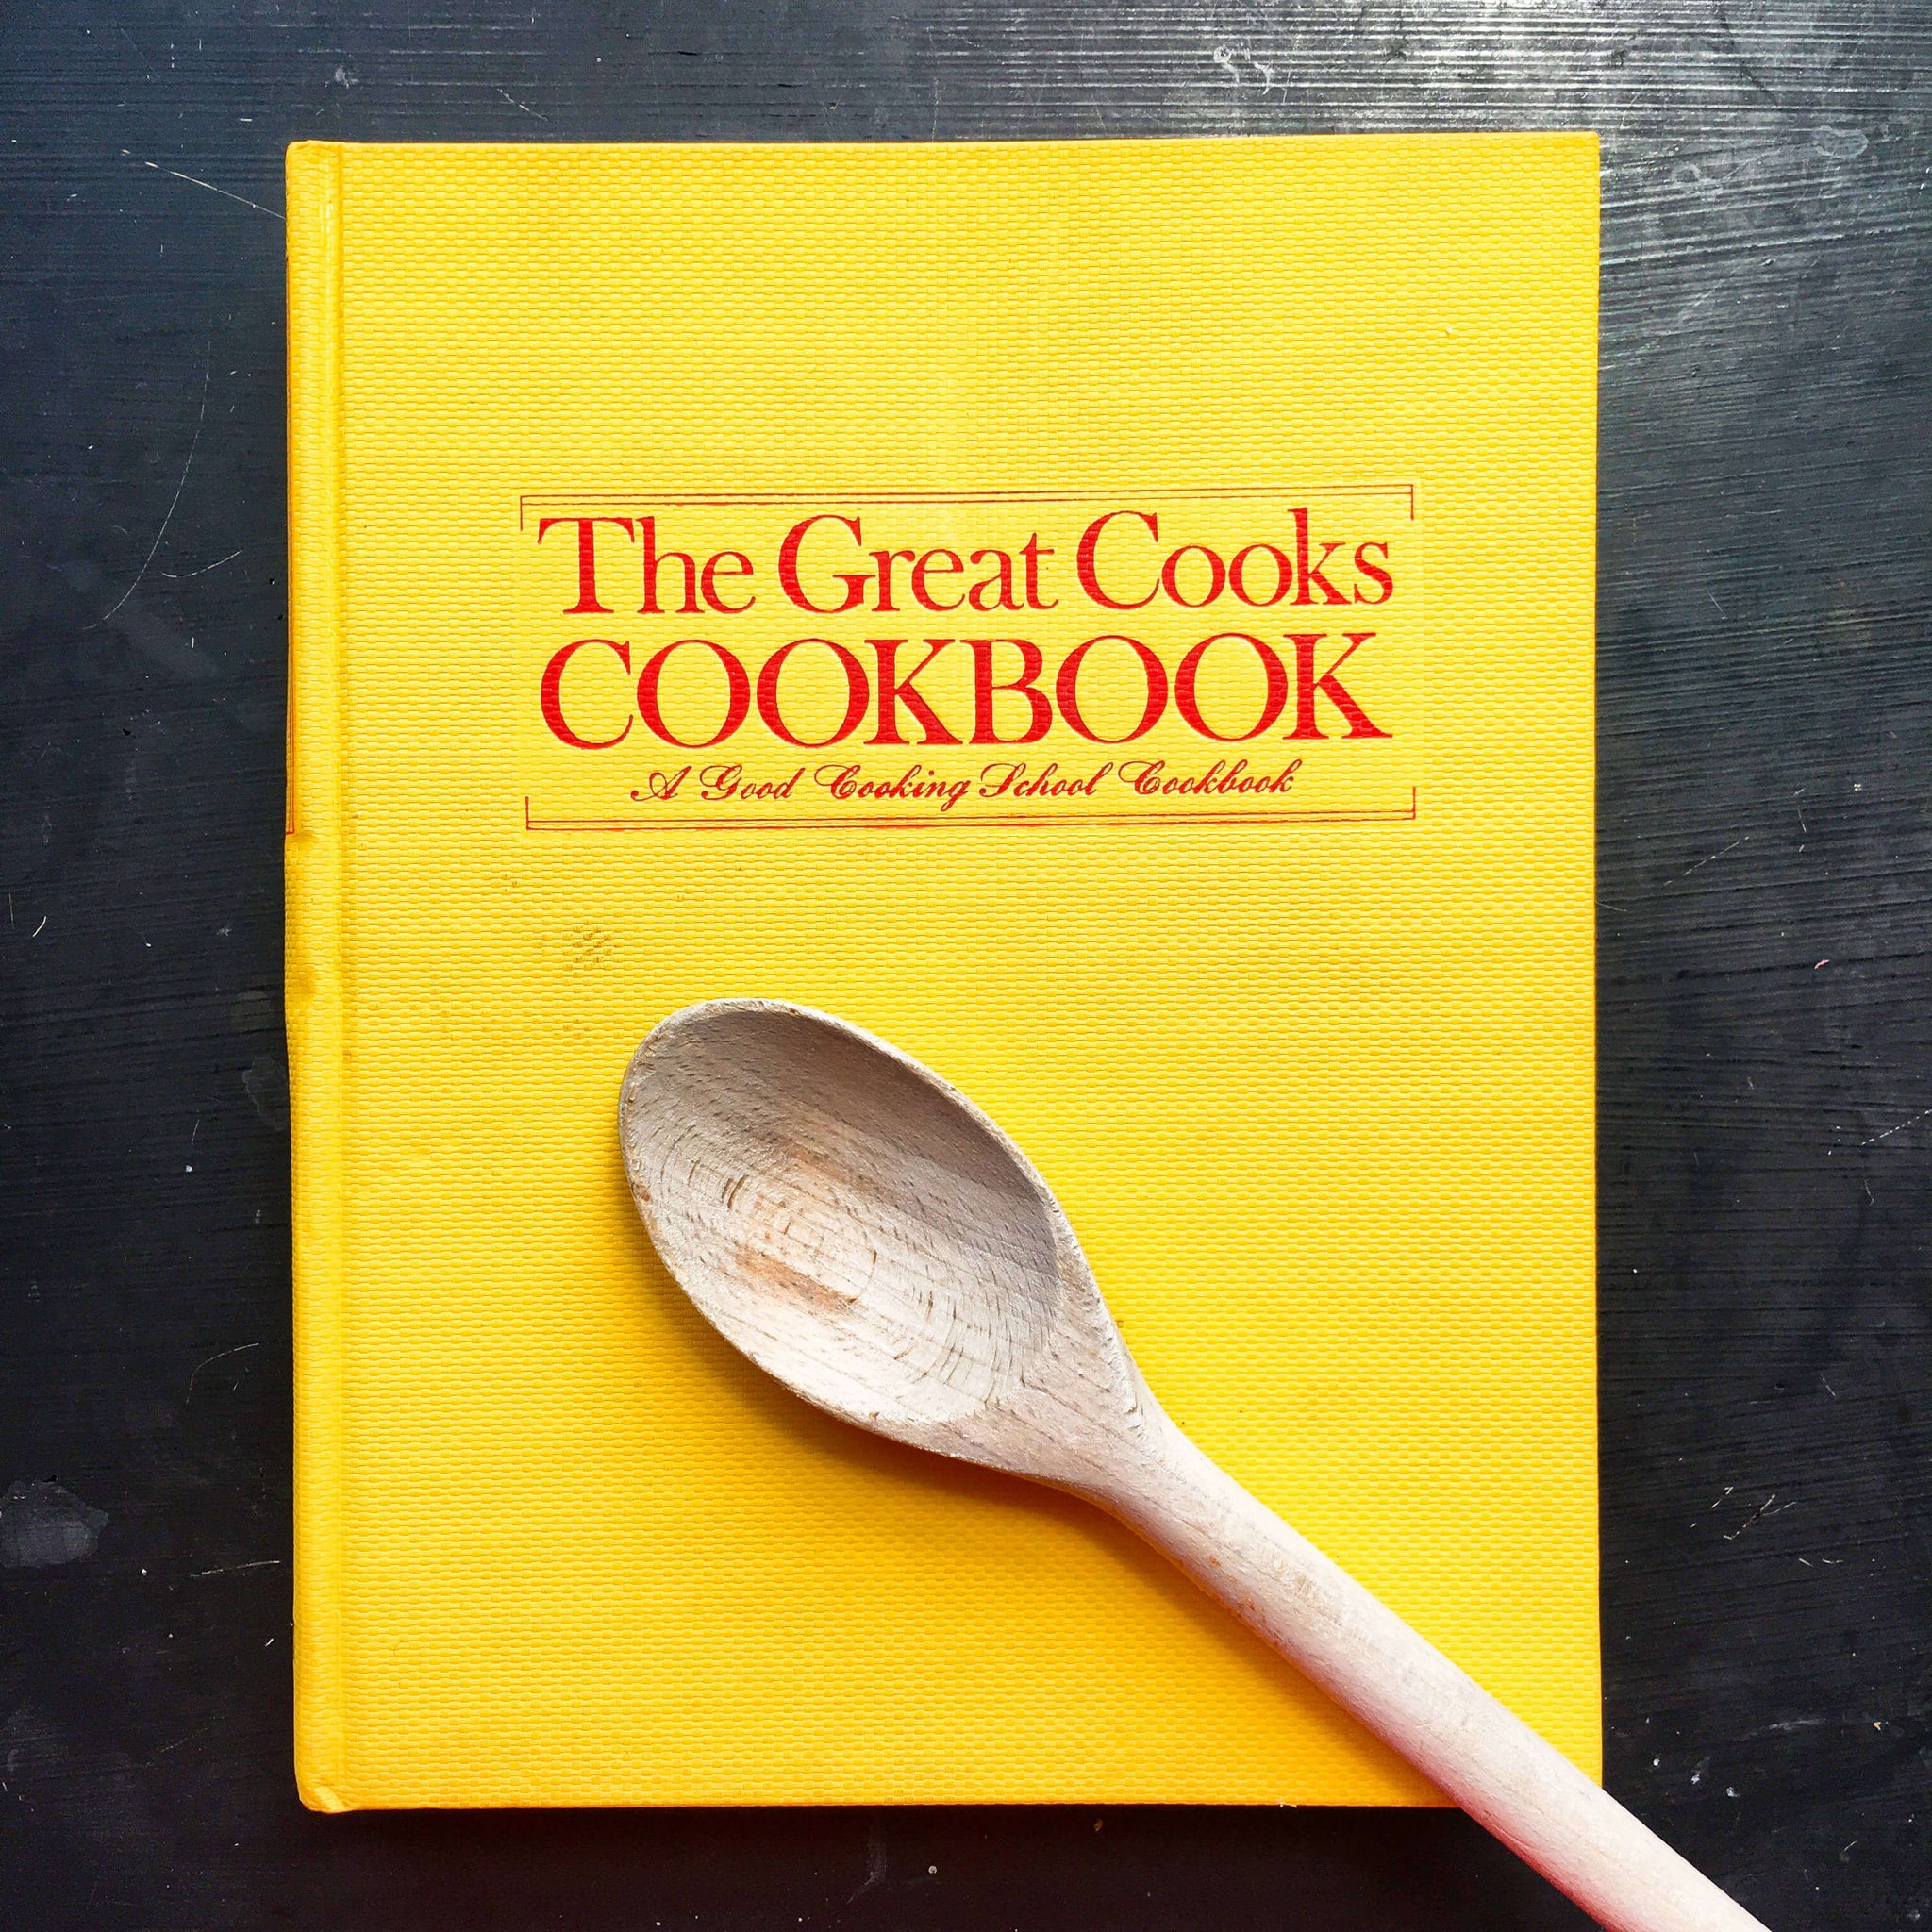 The Great Cooks Cookbook - A Good Cooking School Cookbook - 1974 Edition